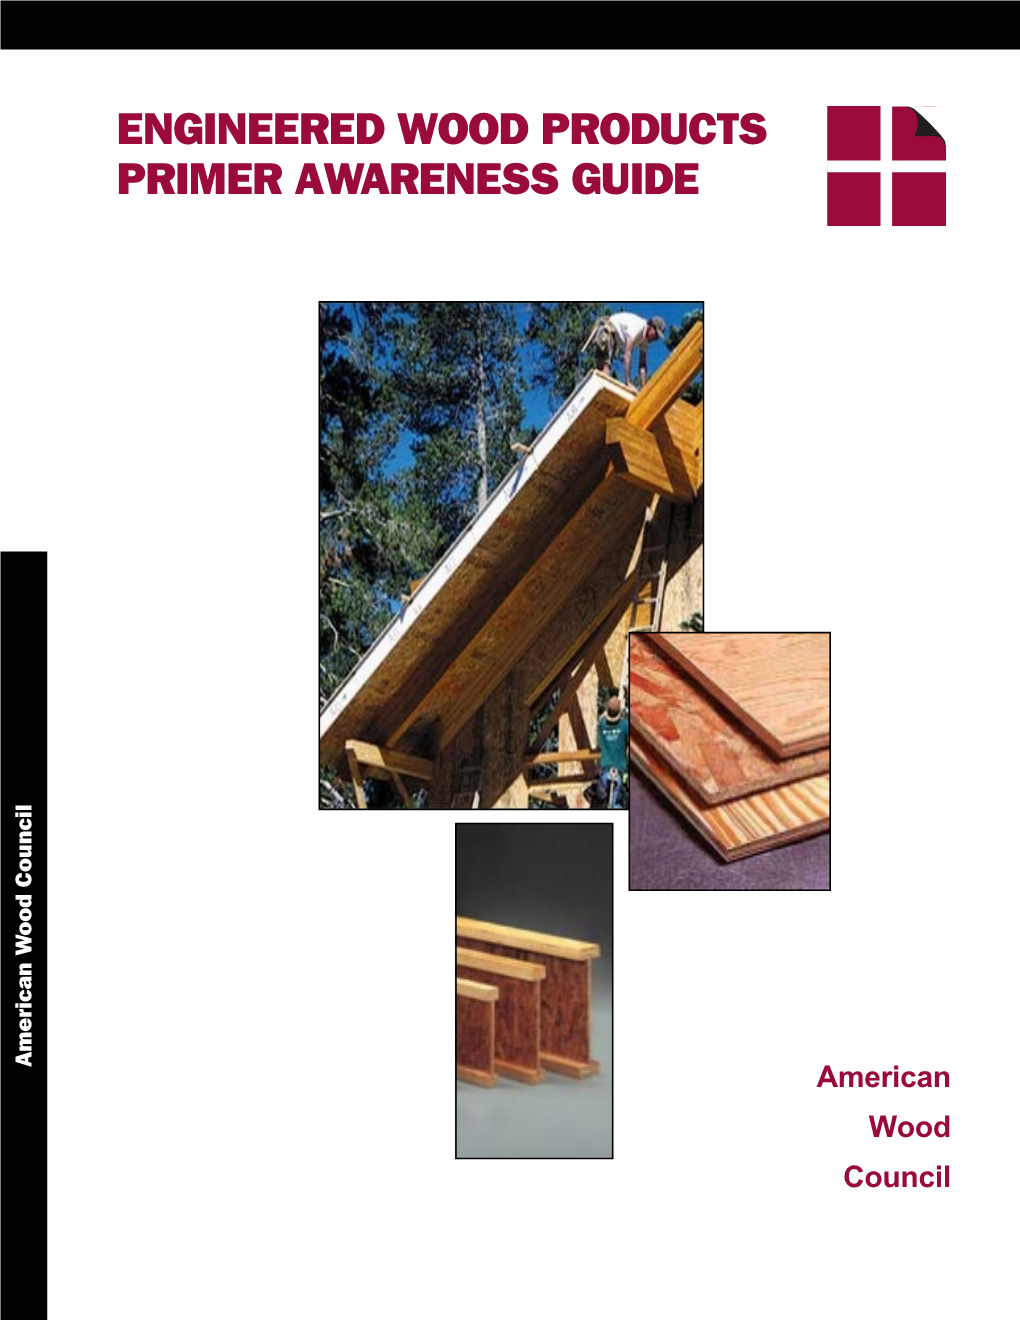 ENGINEERED WOOD PRODUCTS PRIMER AWARENESS Guide